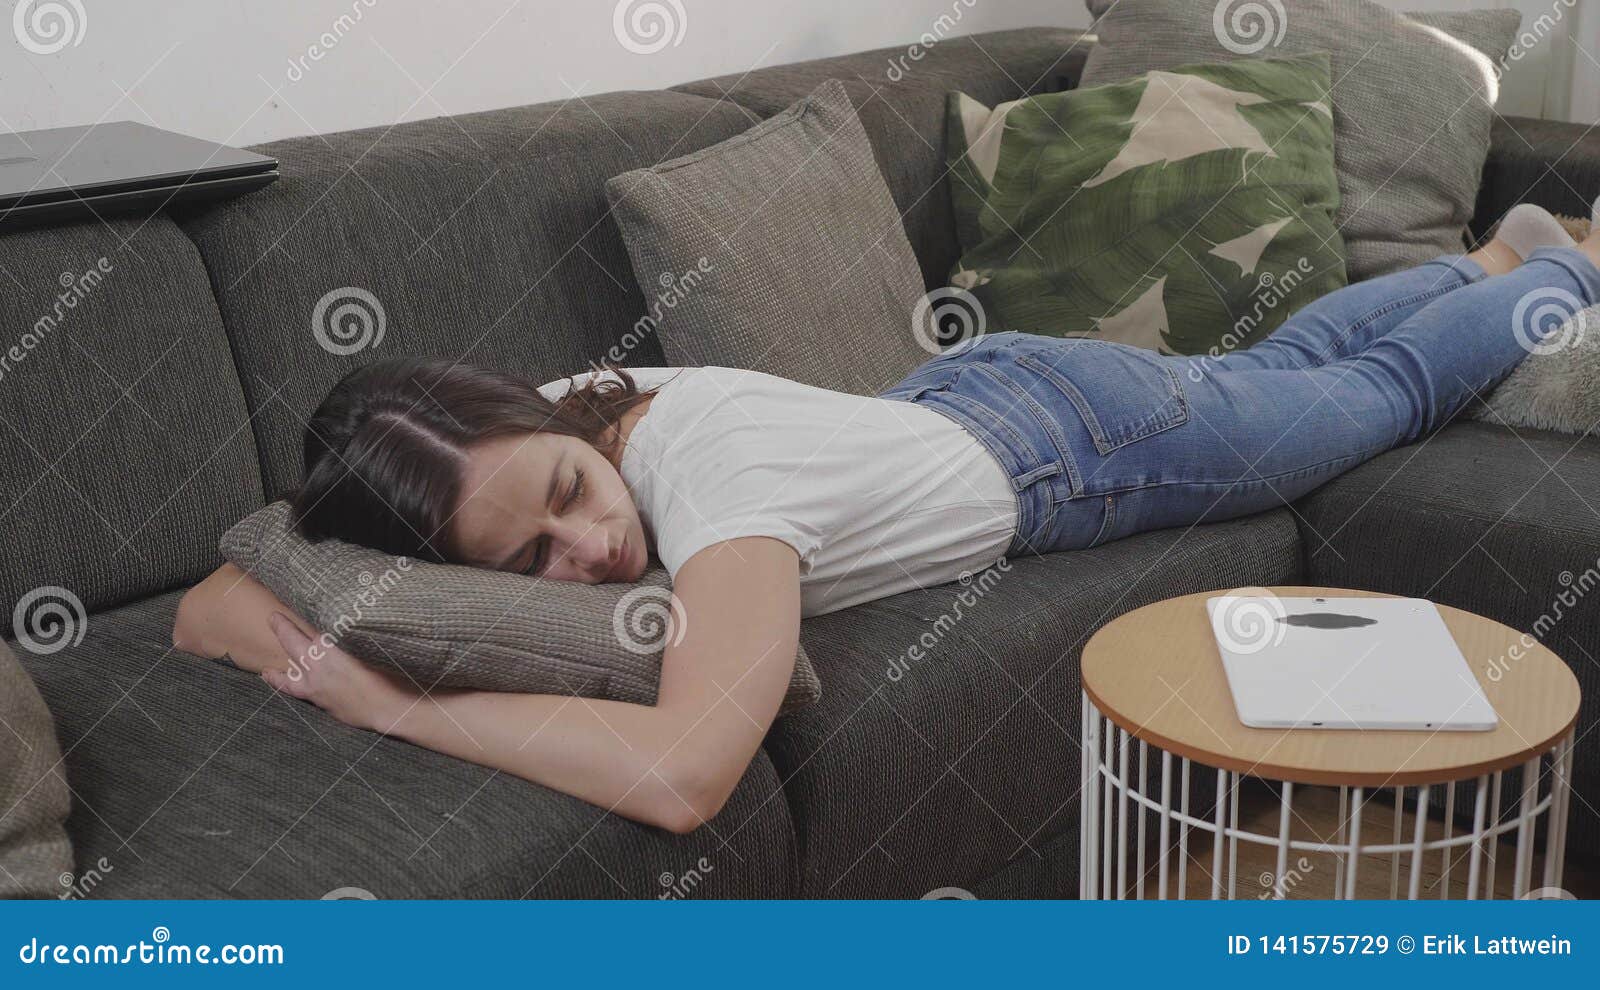 Young Woman Is Sleeping On The Couch Stock Image Image Of Computer